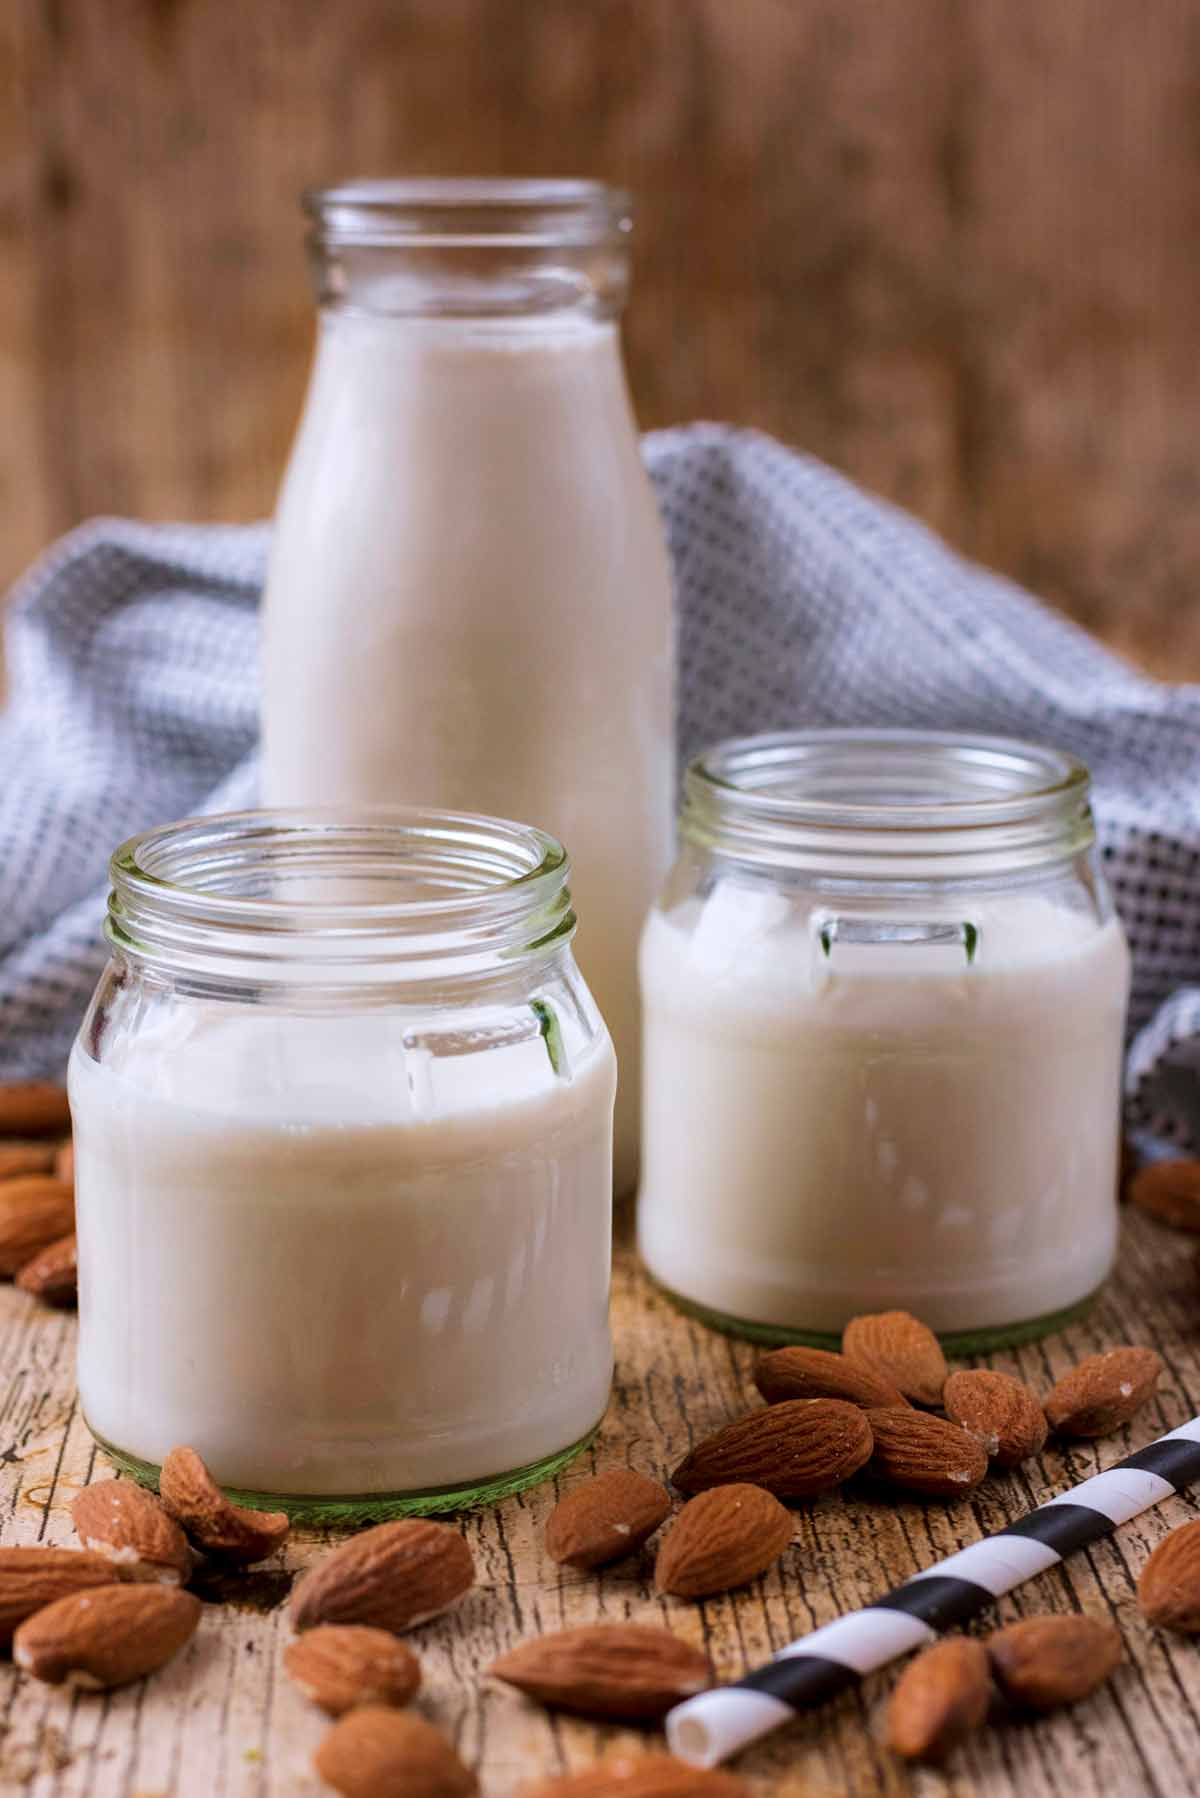 Almond milk in a milk bottle and two small jars. Almonds are scattered around.